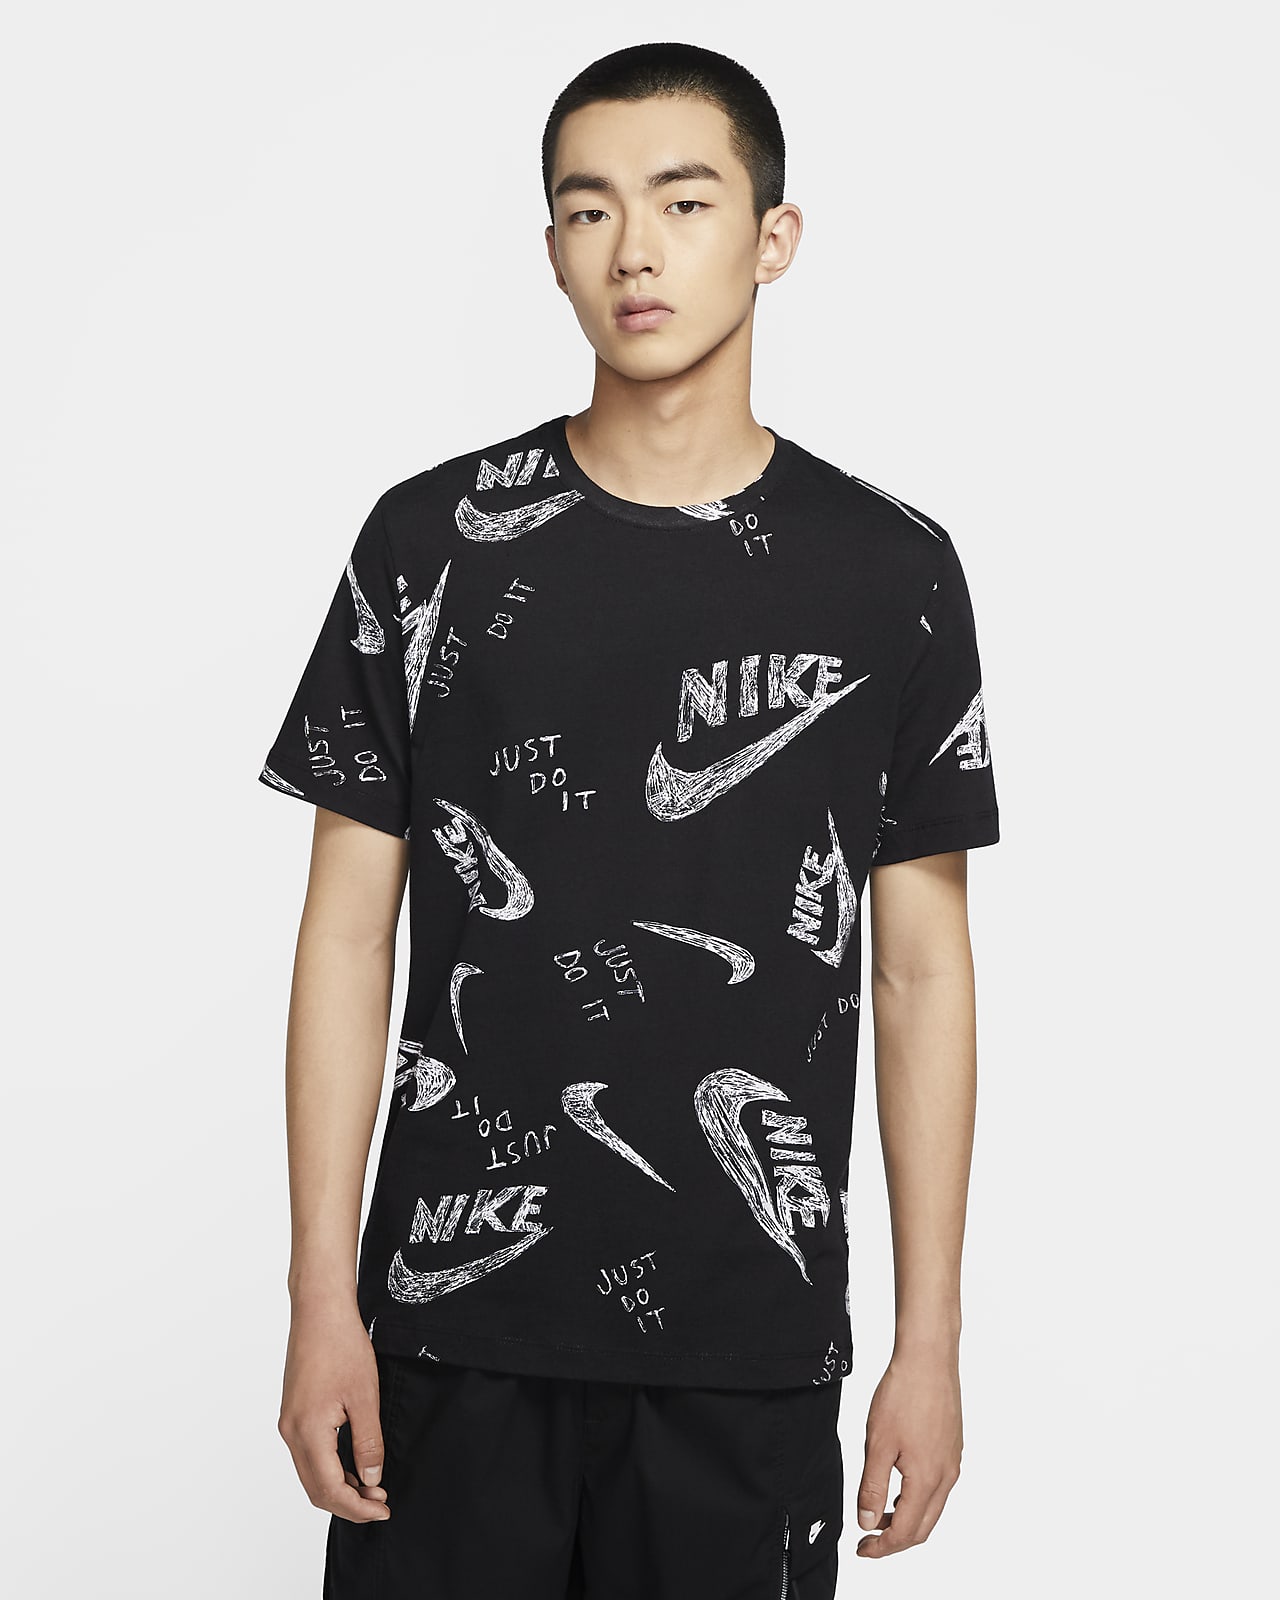 nike shirt with nike all over it